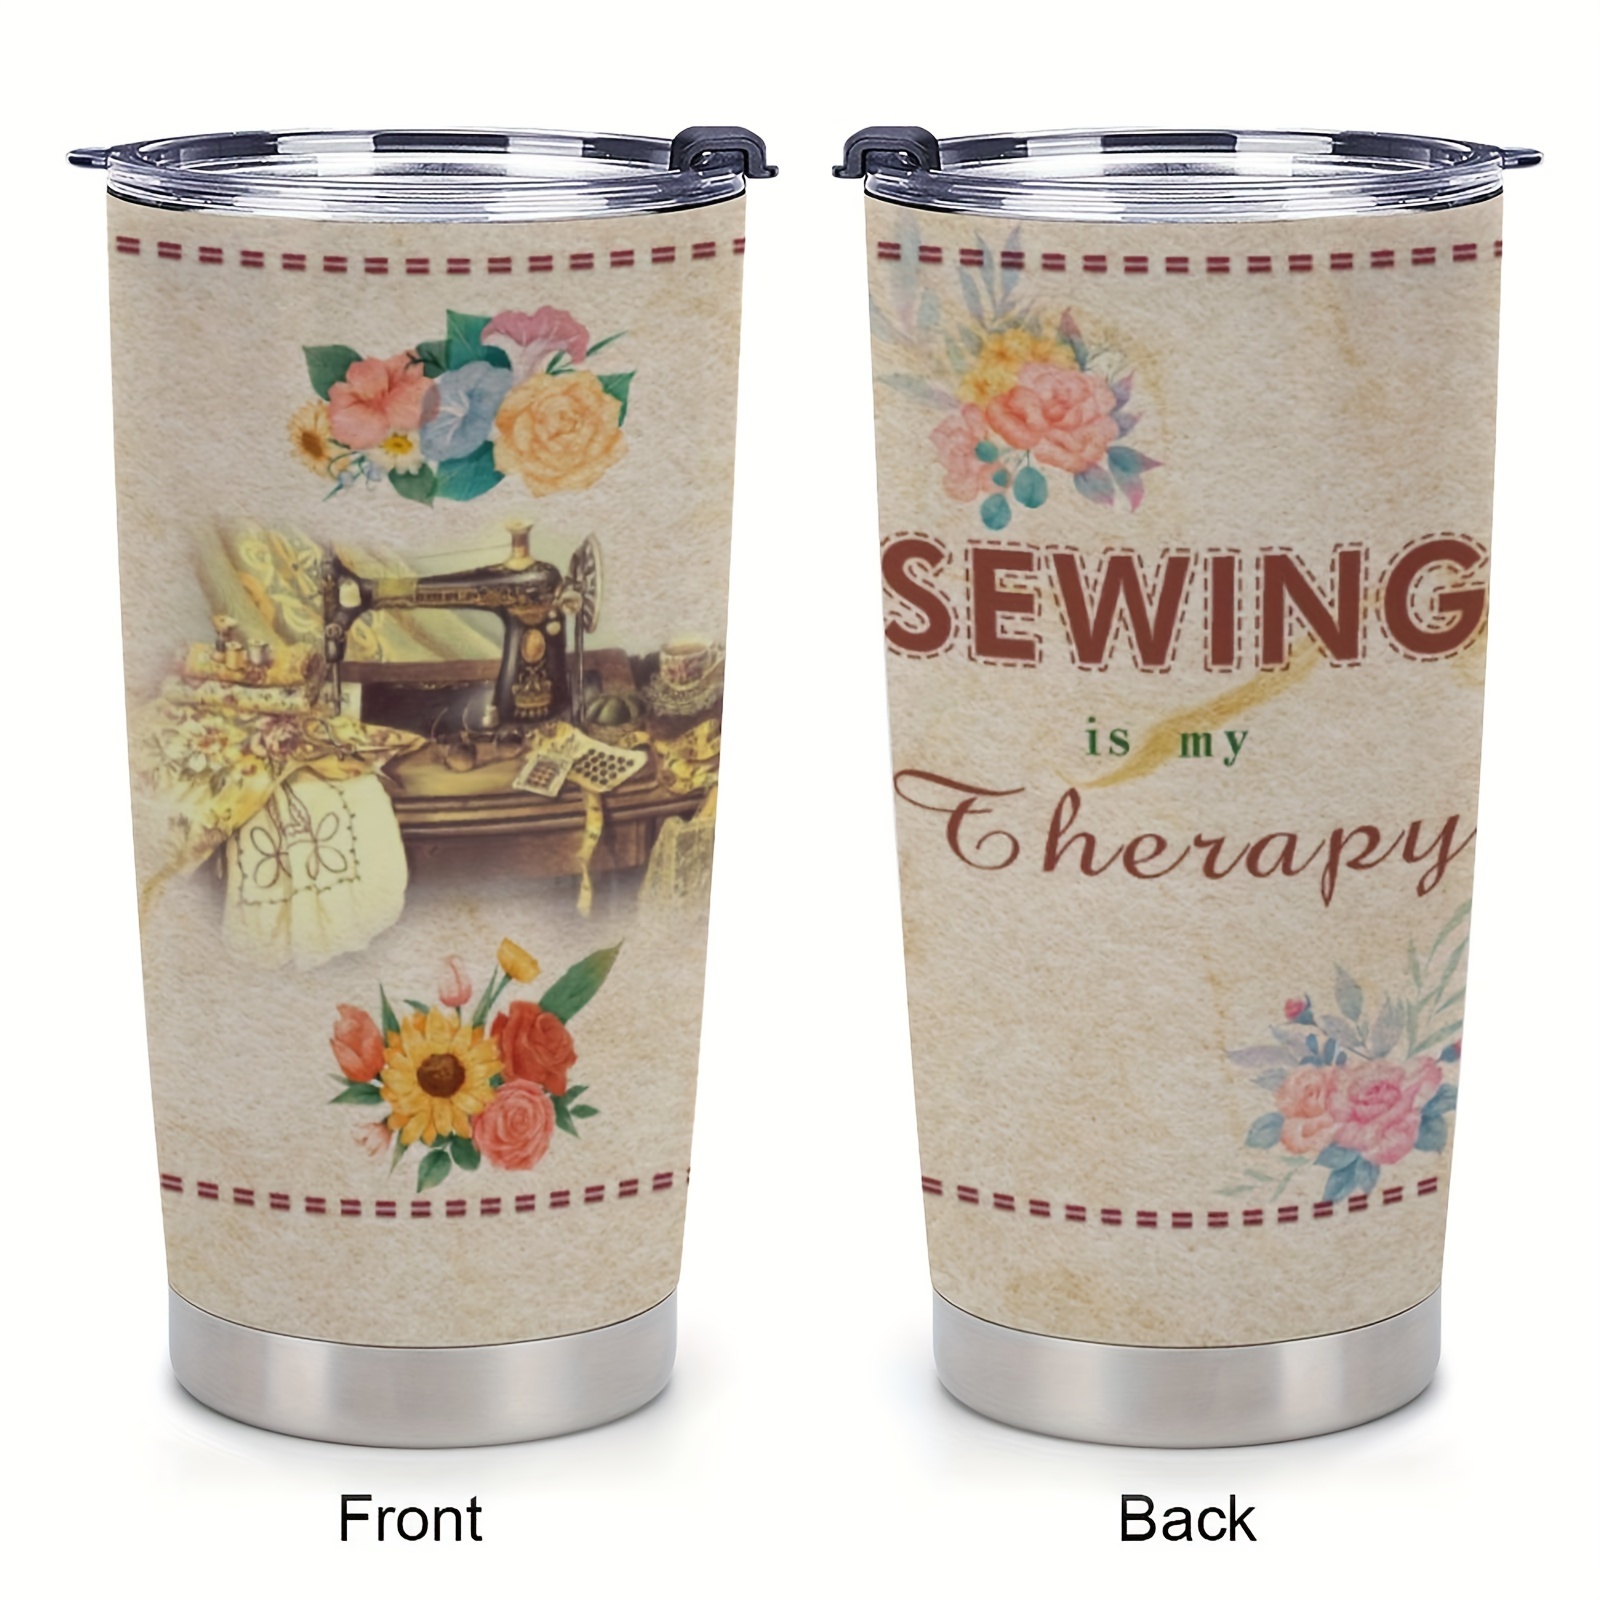 

Sewing Tumbler Sewing Therapy 20oz Tumblers With Lid Gift For Women Quilting Crochet Lover Mom Grandma Birthday Christmas